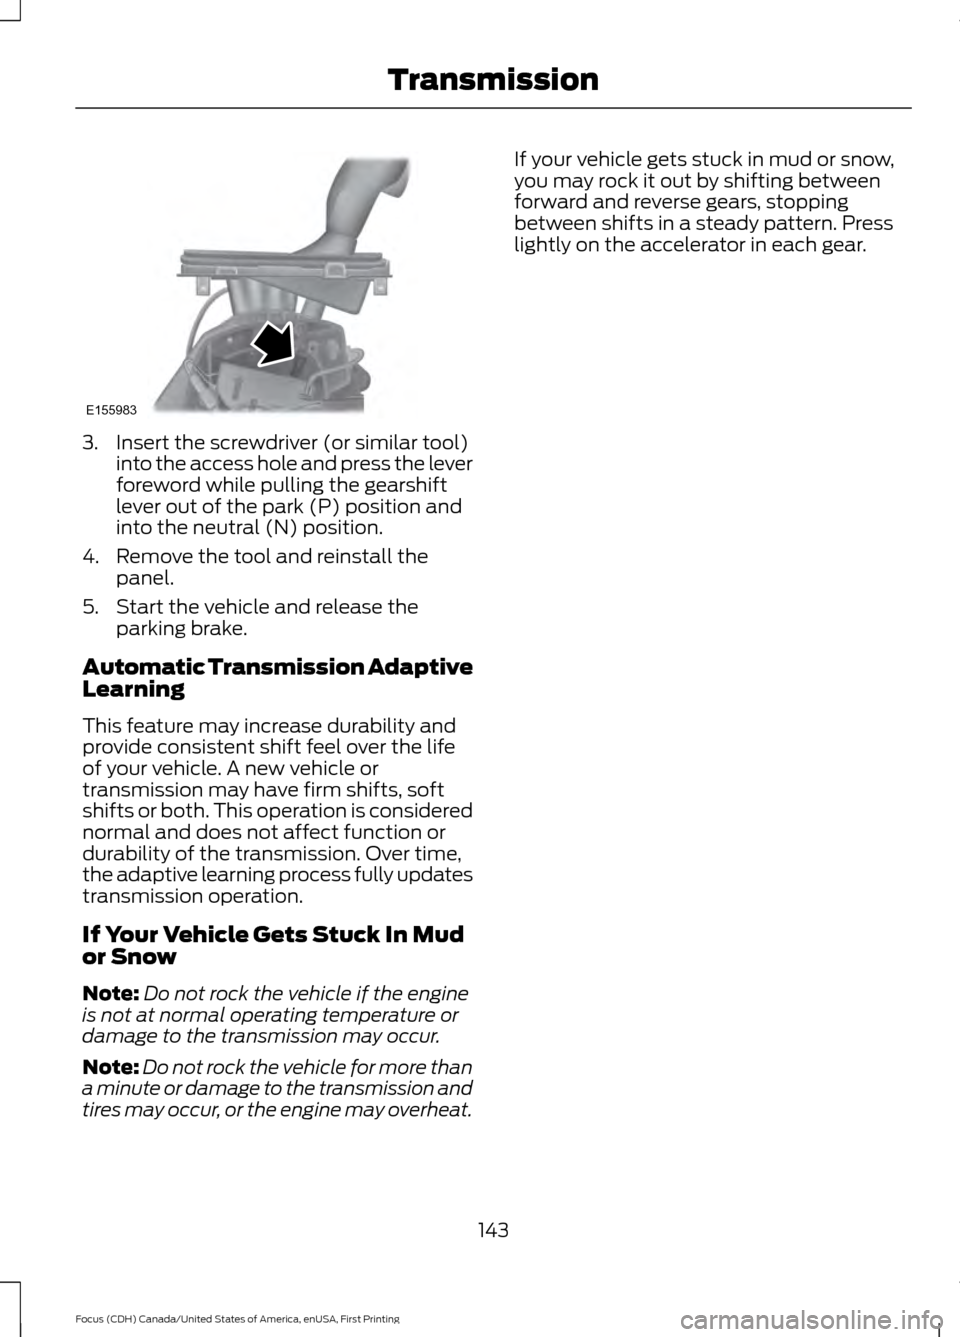 FORD FOCUS 2016 3.G Owners Manual 3. Insert the screwdriver (or similar tool)
into the access hole and press the lever
foreword while pulling the gearshift
lever out of the park (P) position and
into the neutral (N) position.
4. Remov